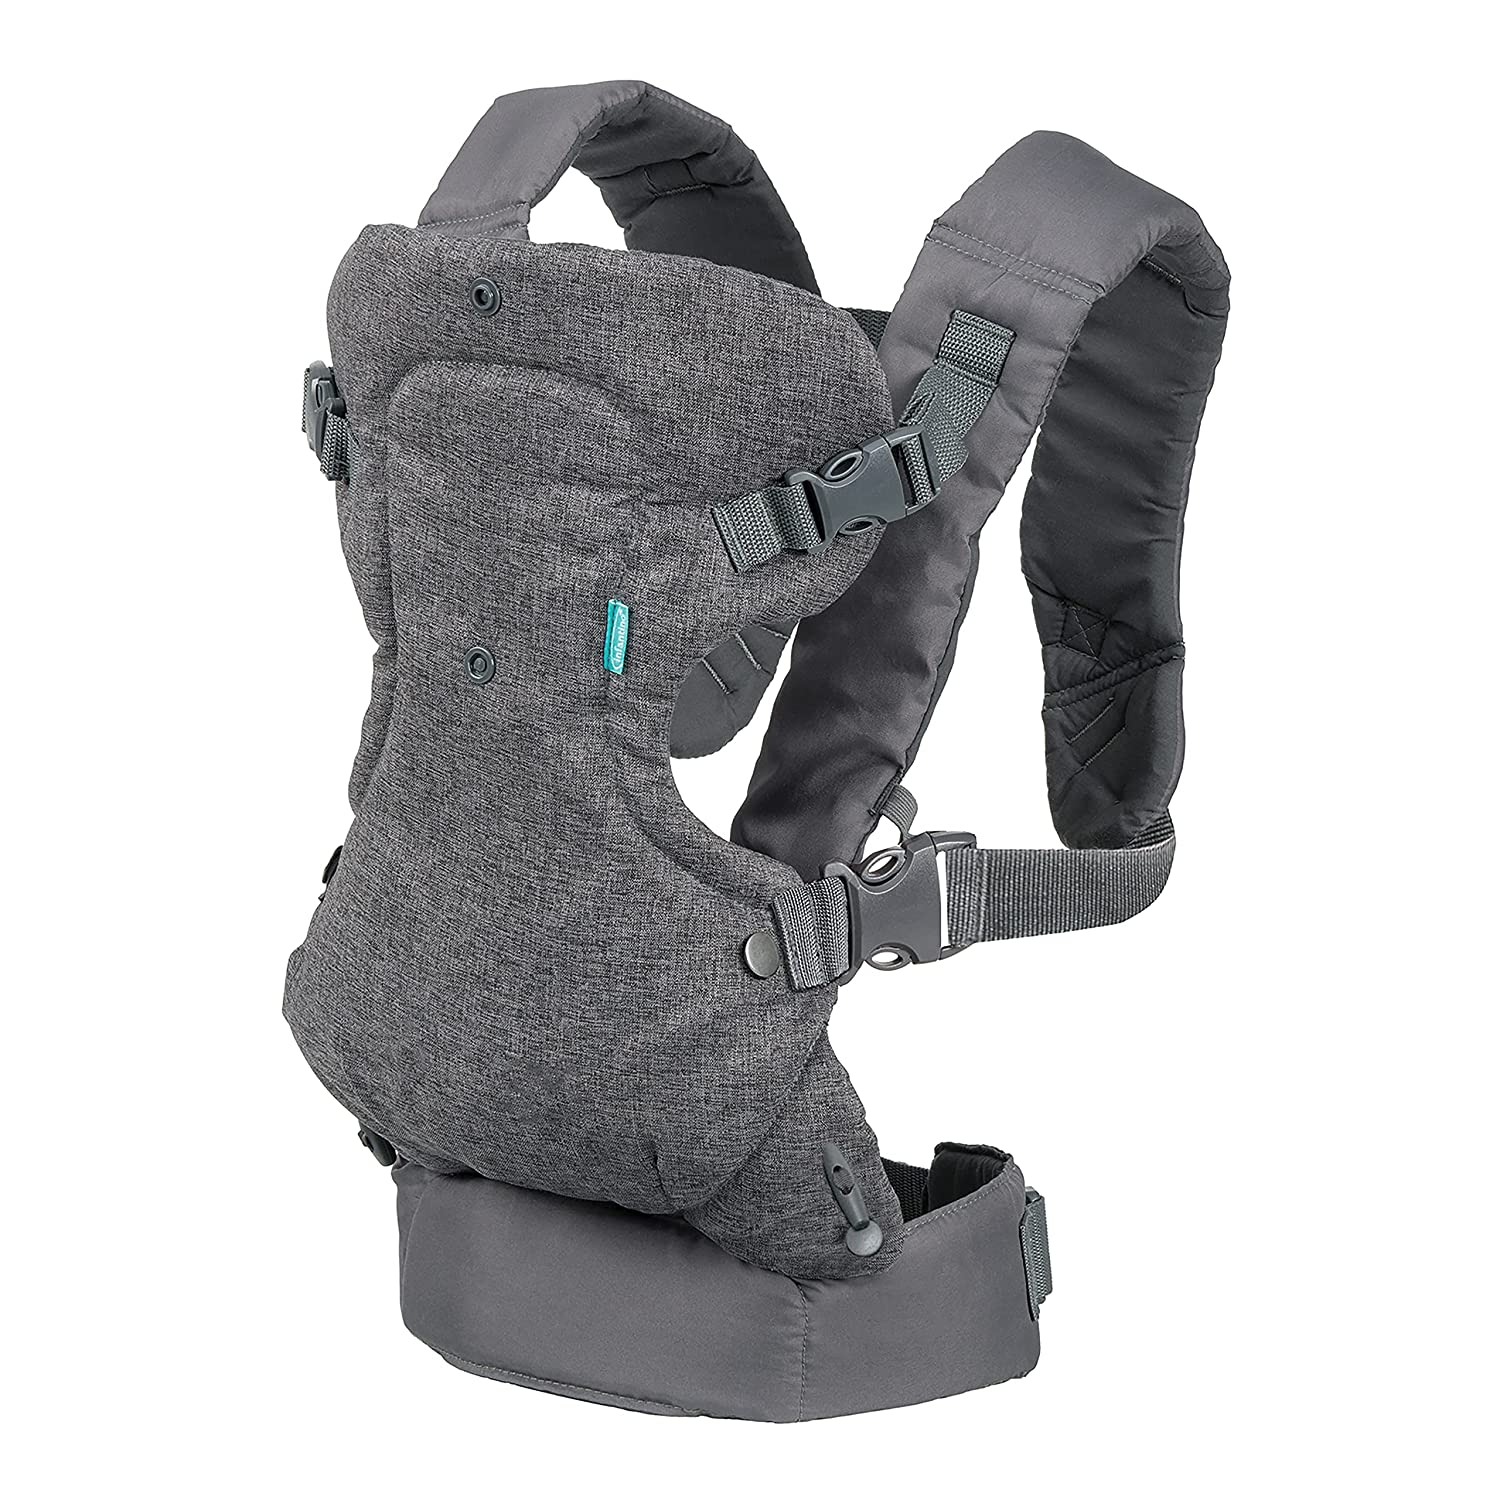 Infantino Flip Advanced 4-in-1 Carrier – Ergonomic, convertible, face-in and face-out front and back carry for newborns and older babies 8-32 lbs